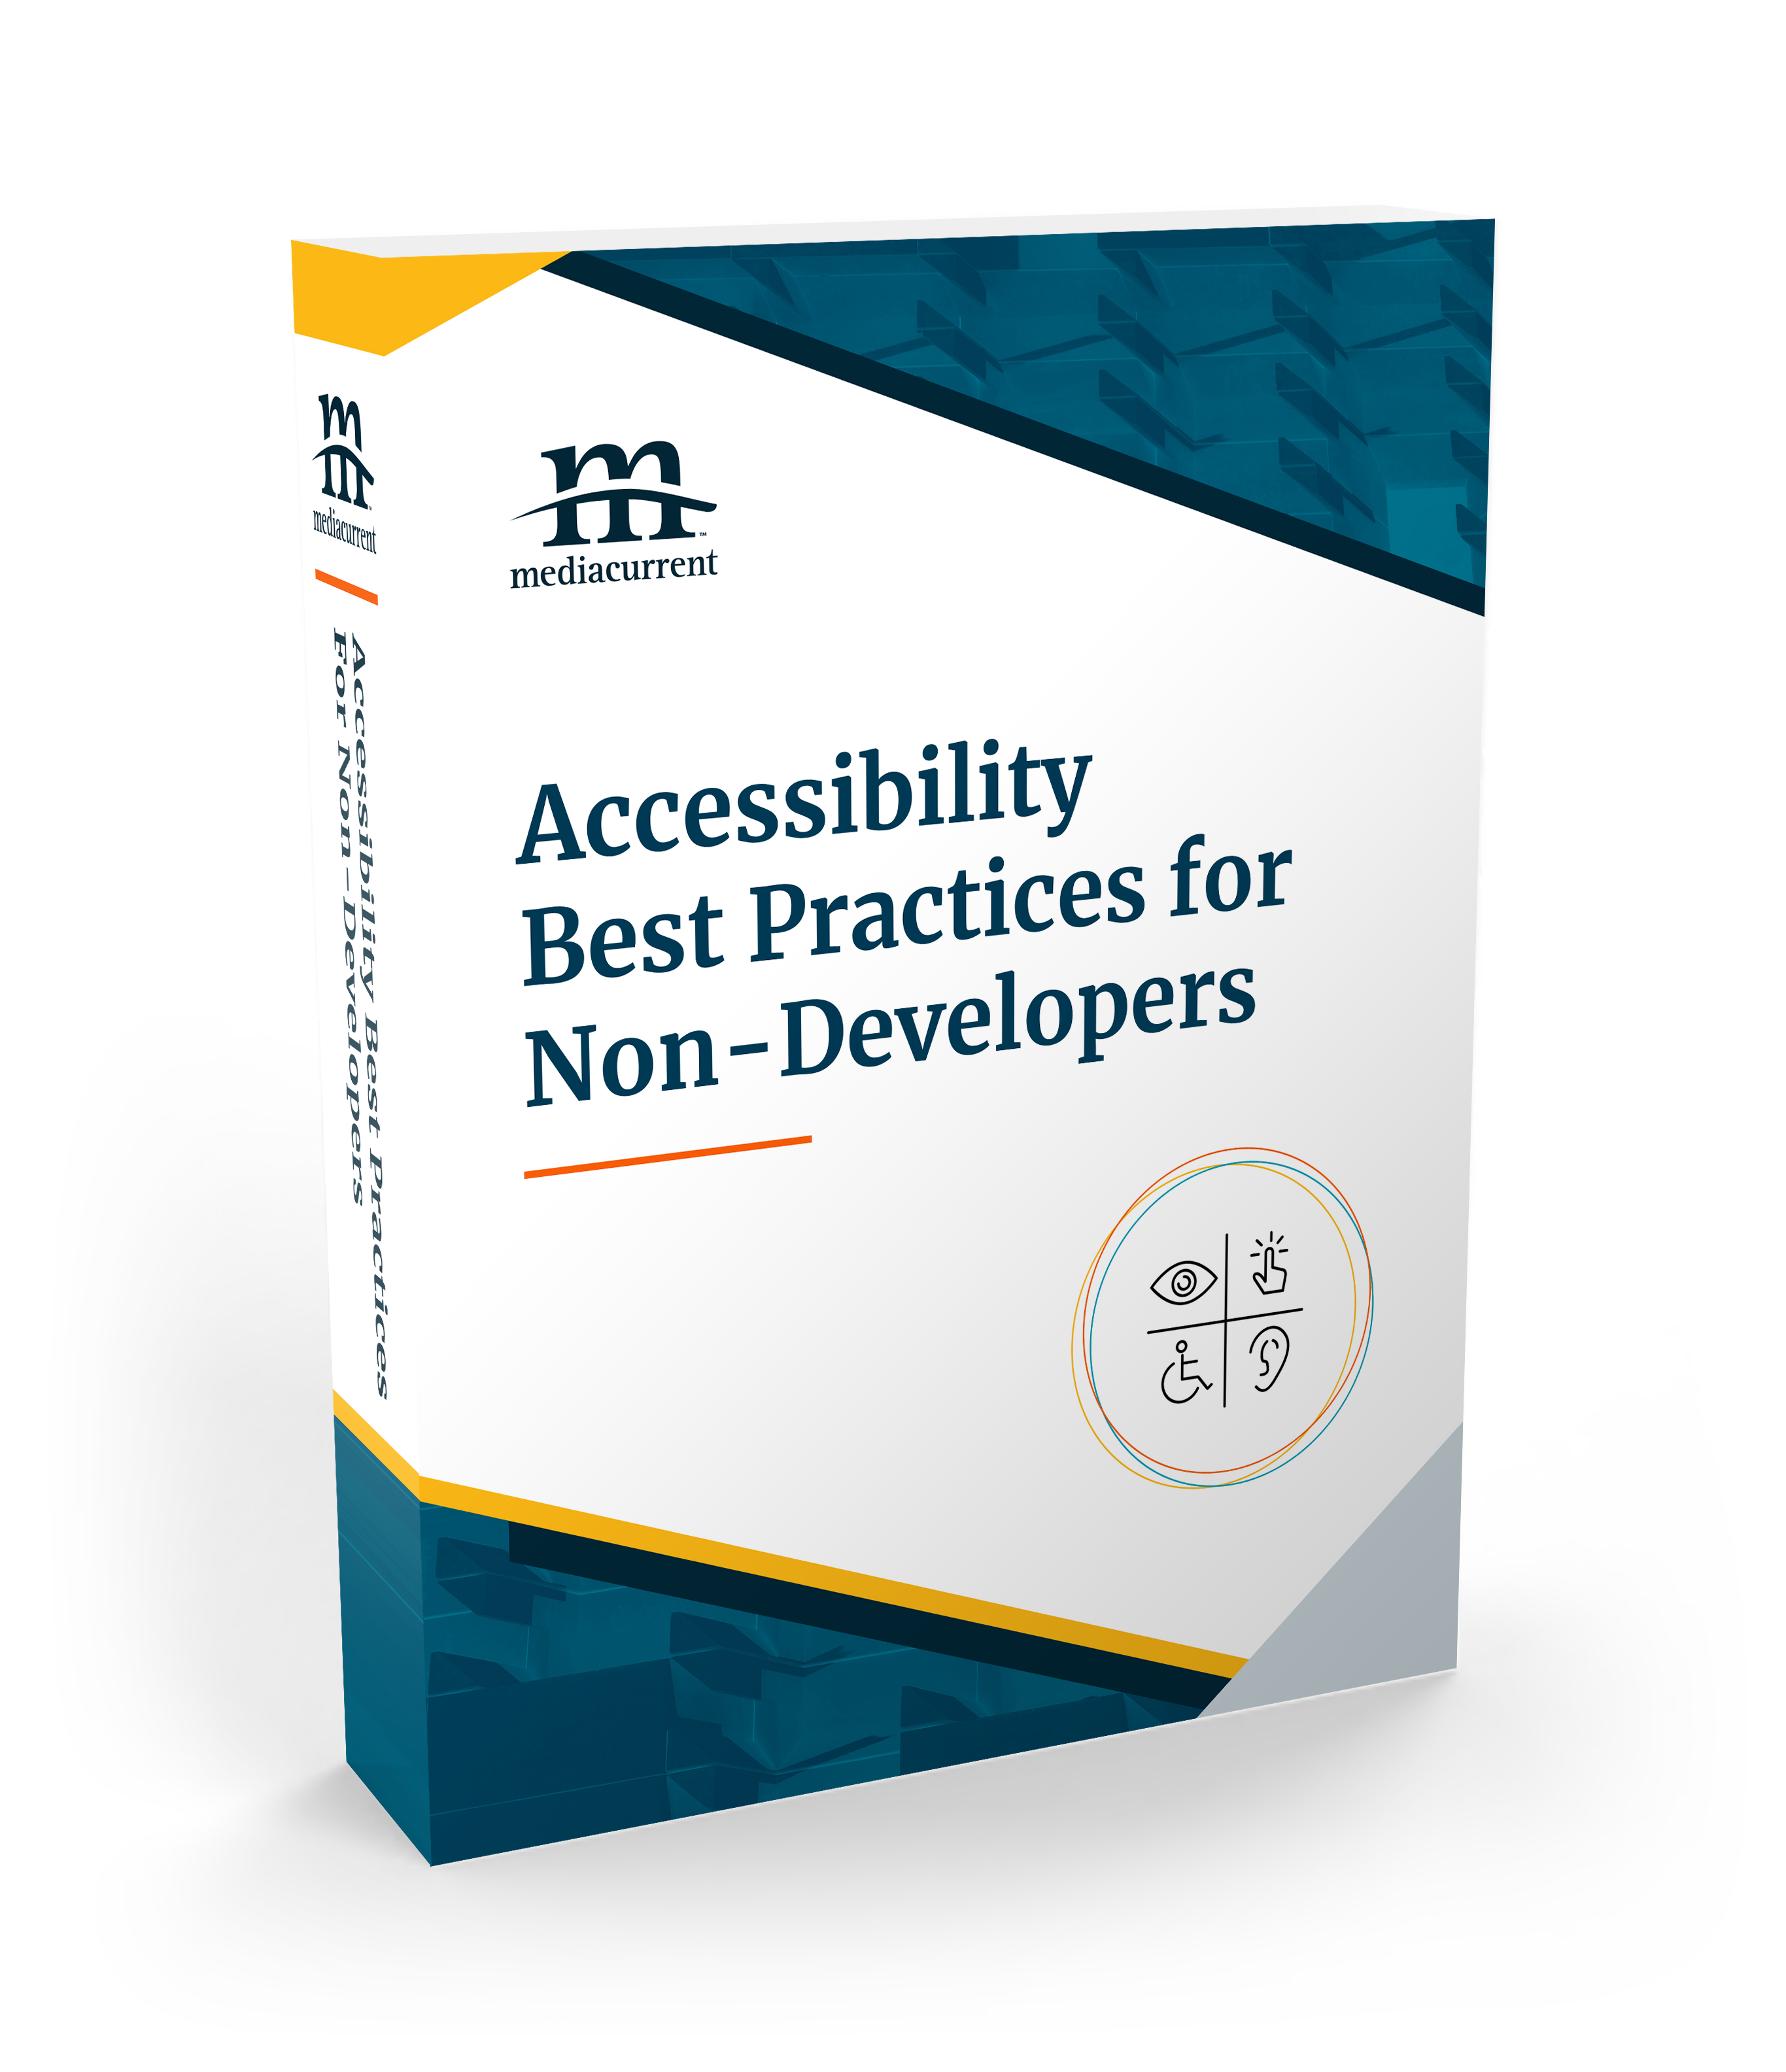 accessibility guide for non-developers ebook cover 